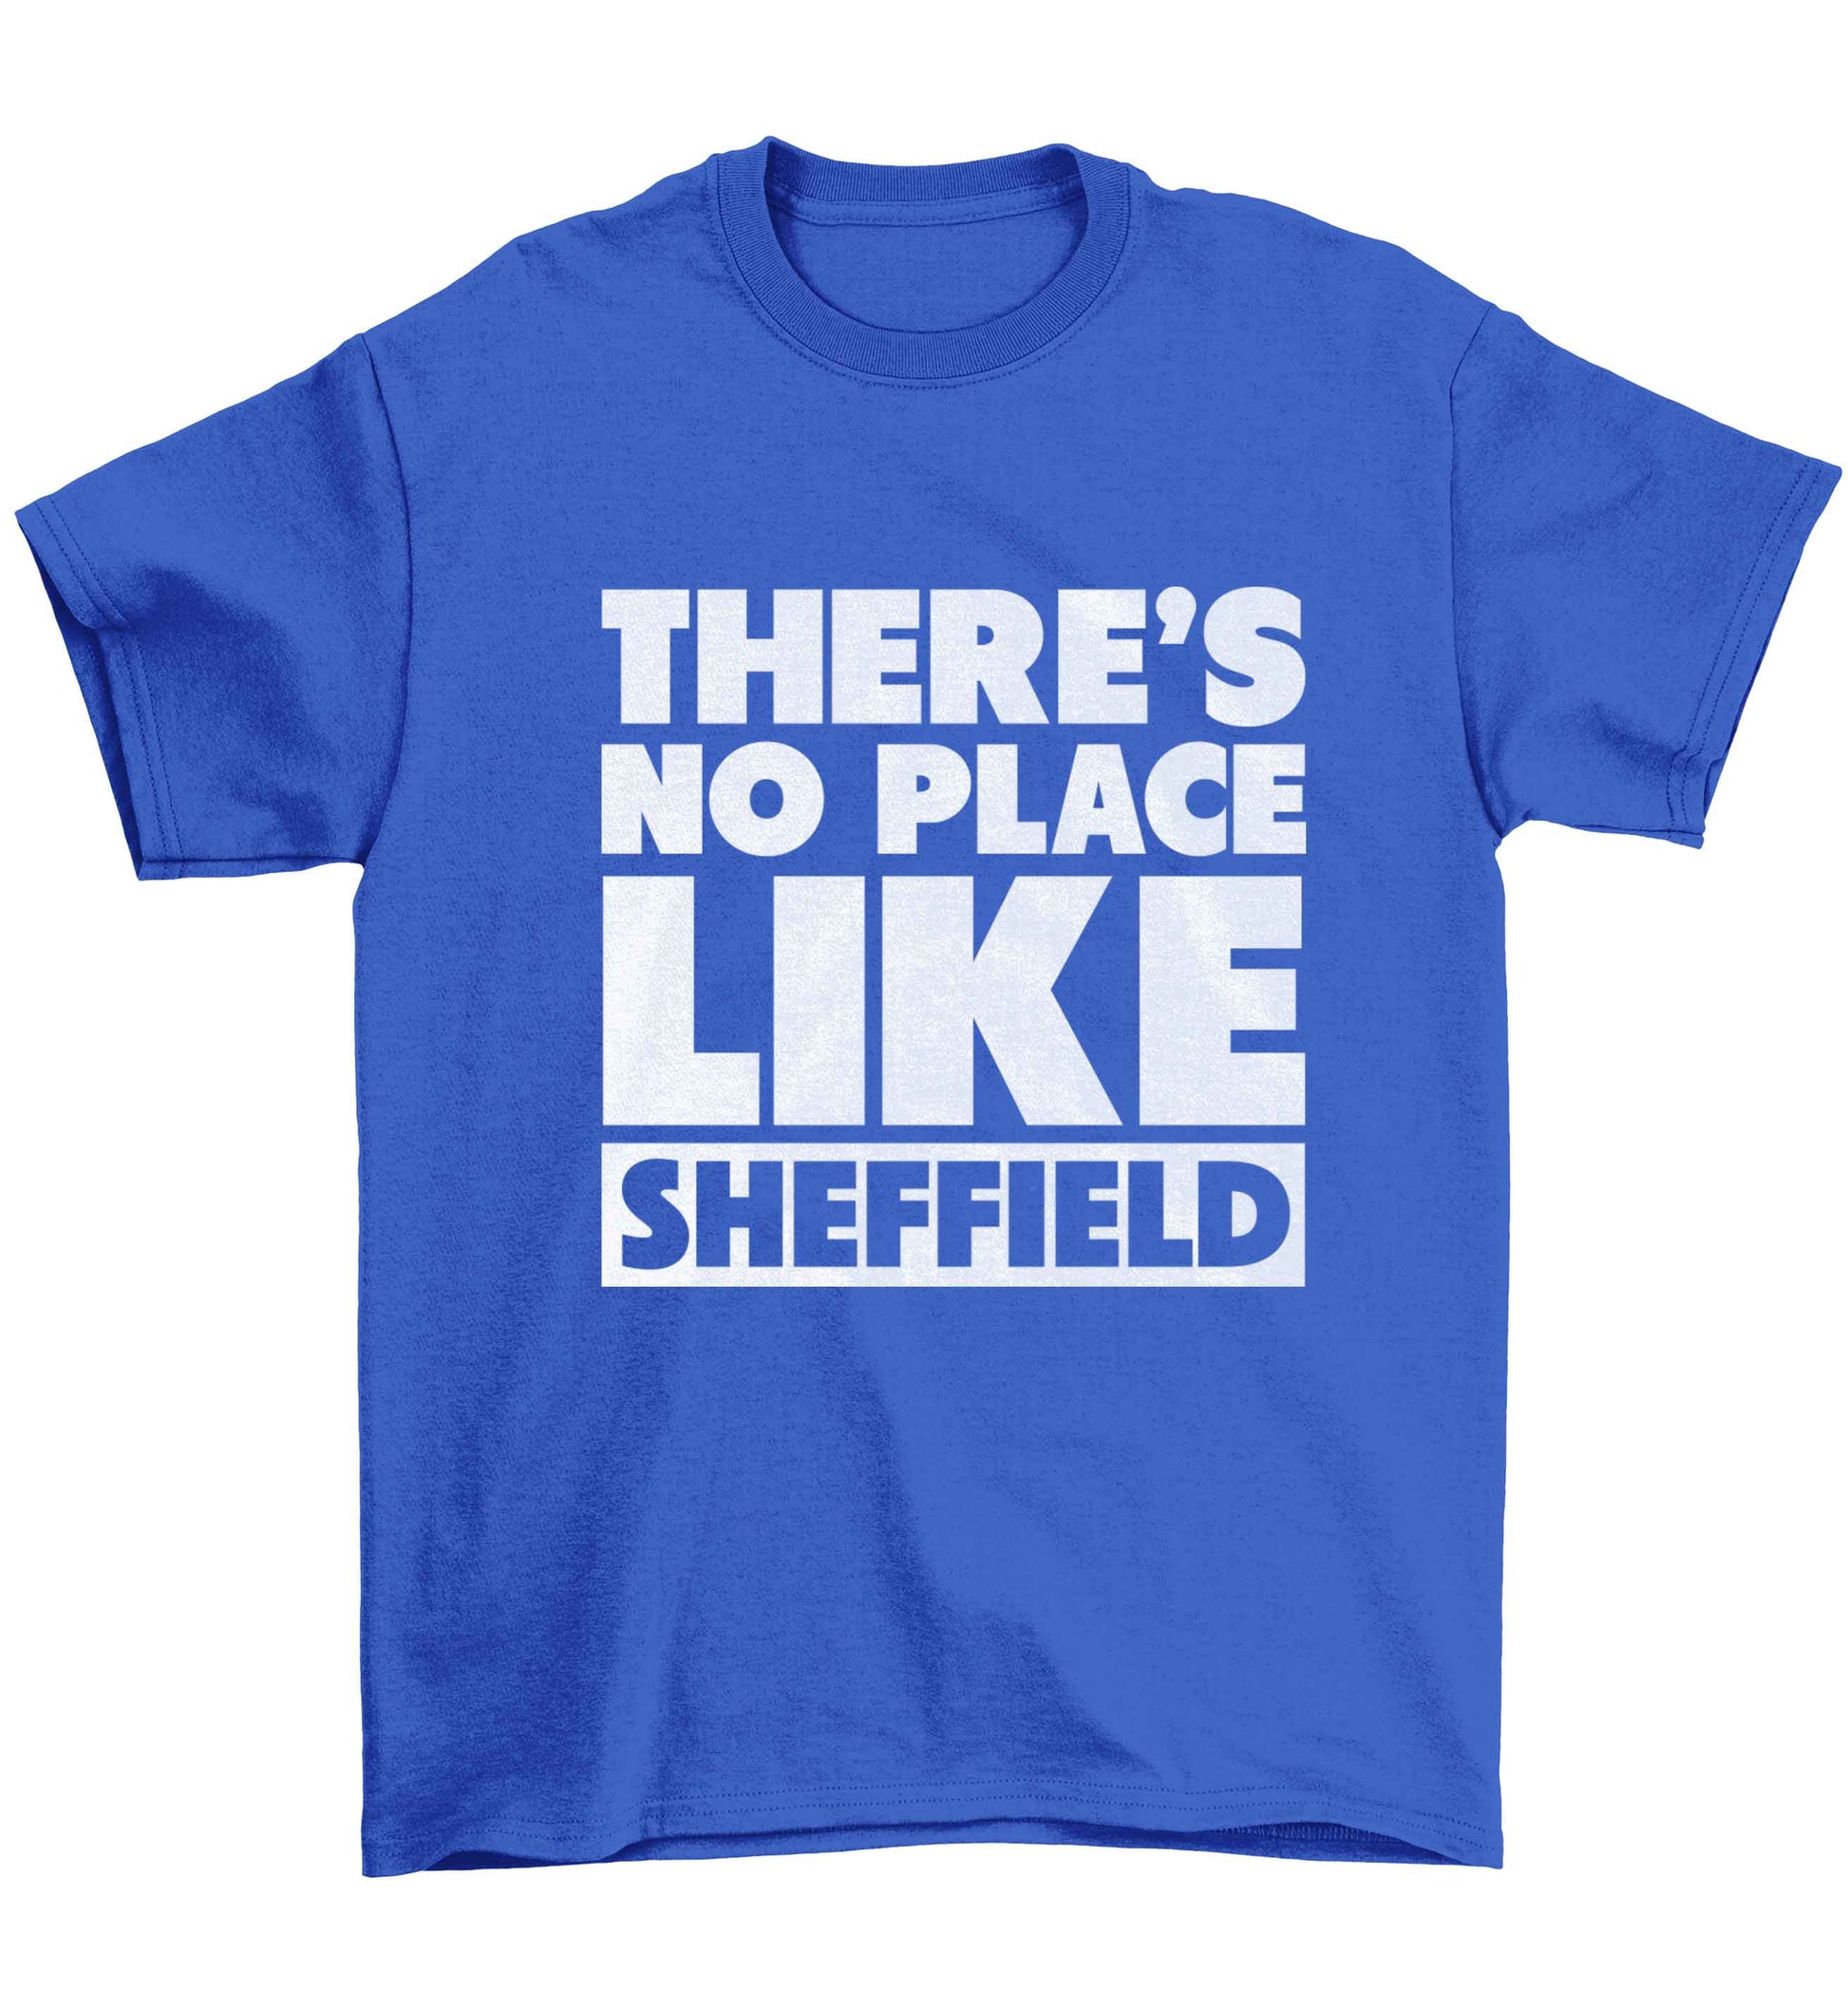 There's no place like Sheffield Children's blue Tshirt 12-13 Years